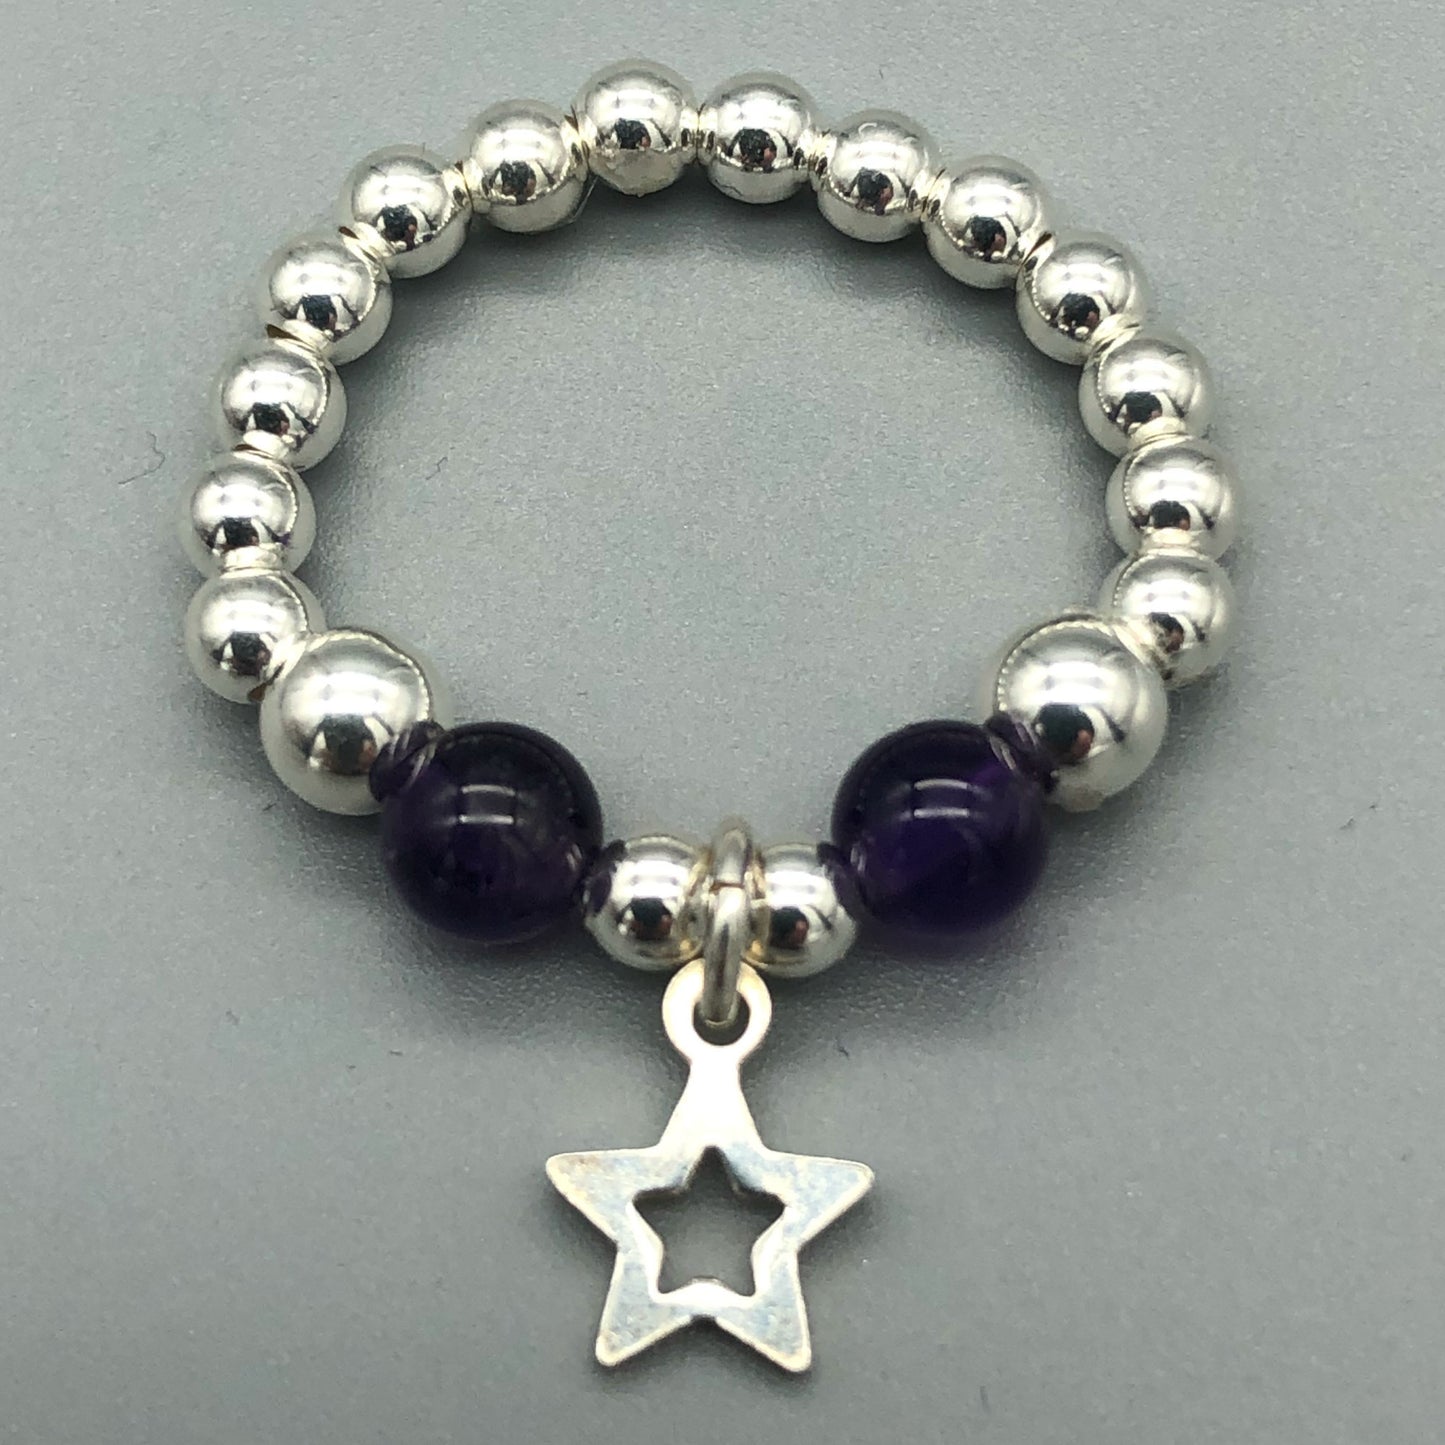 Star charm amethyst sterling silver charm women's bead stacking ring by My Silver Wish